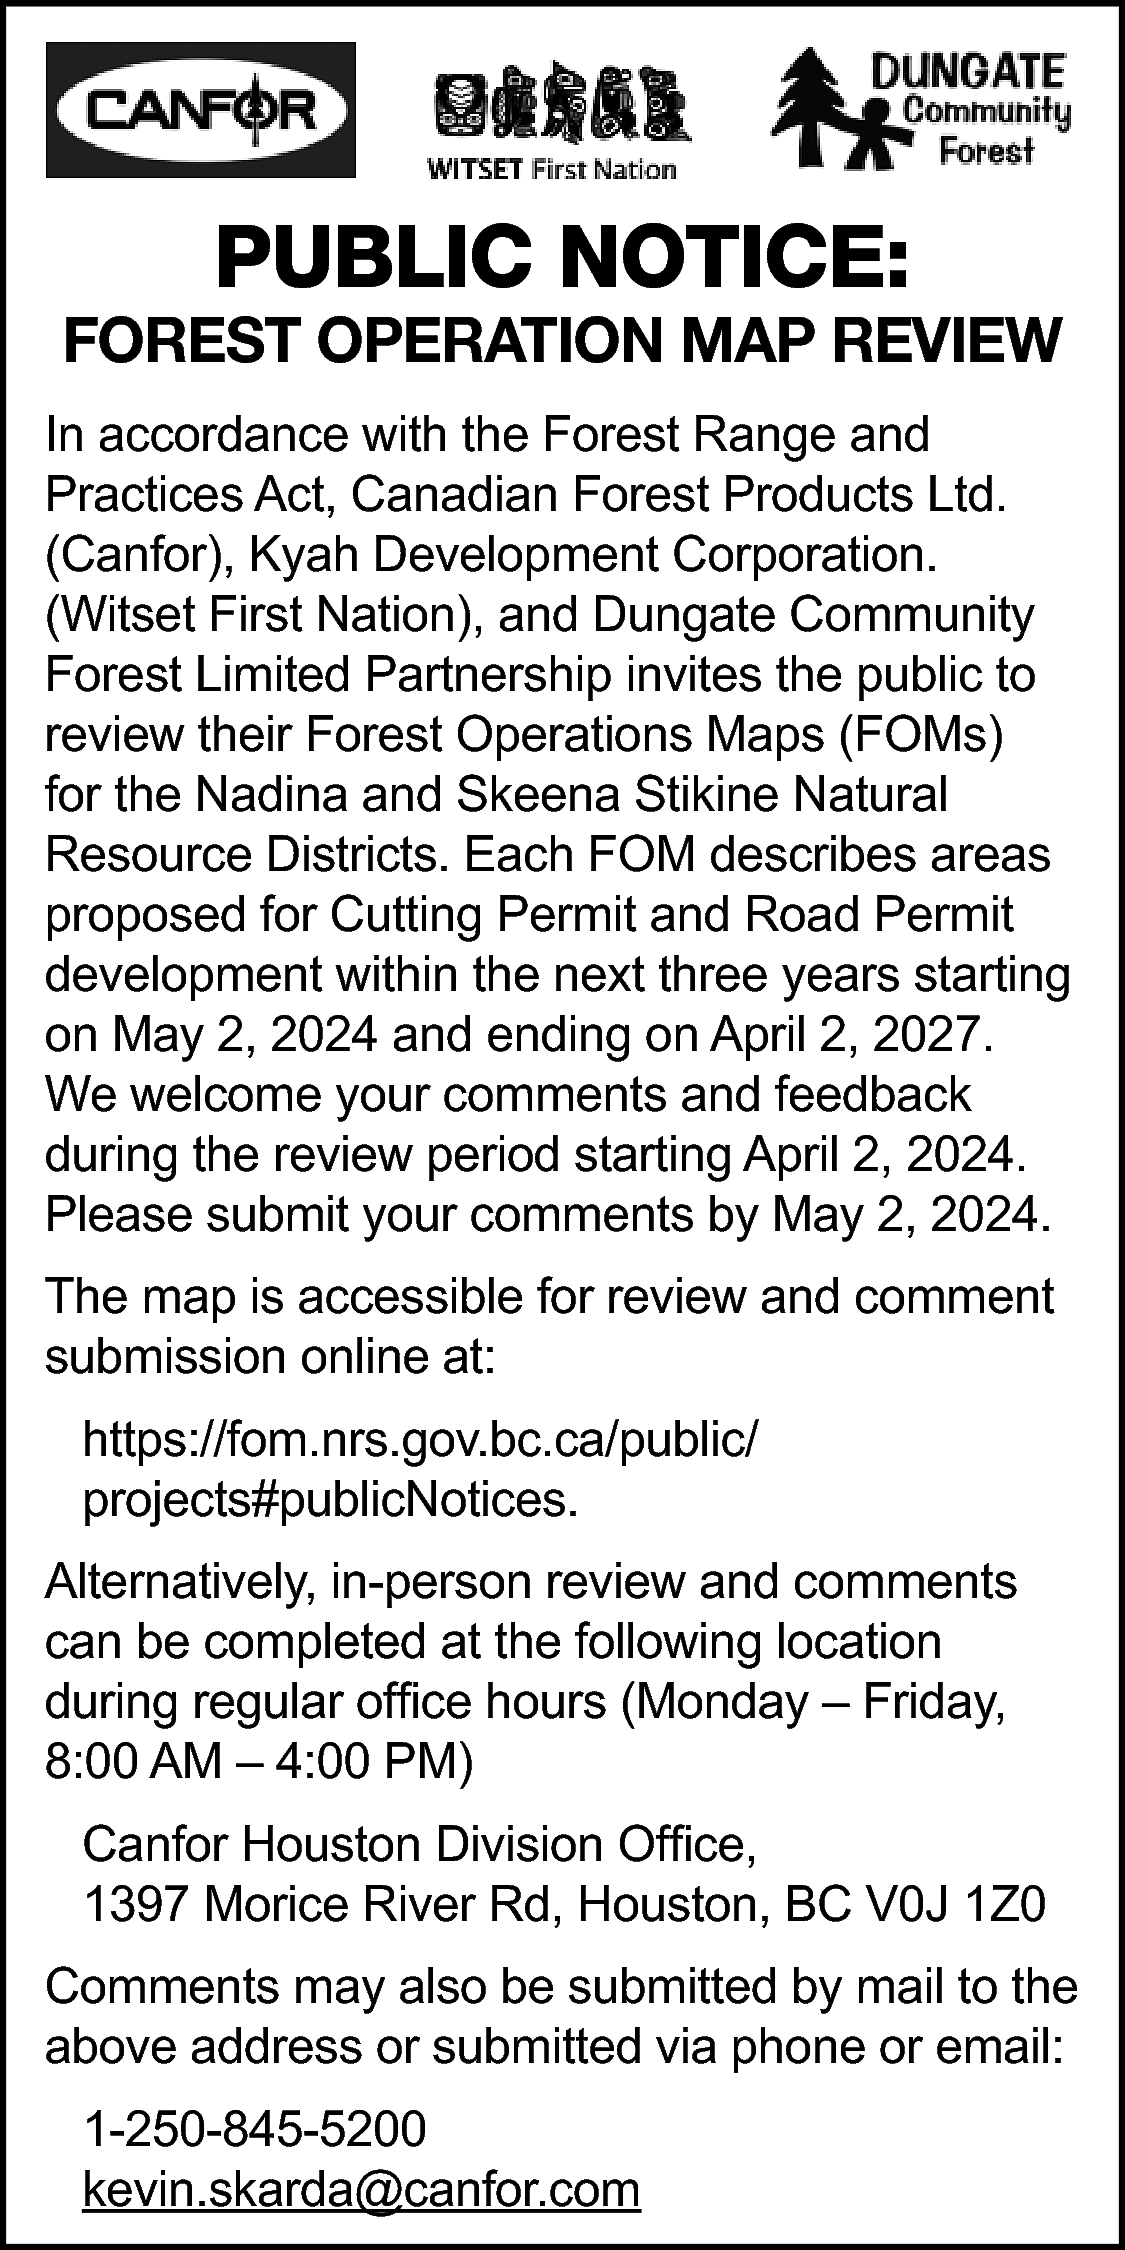 PUBLIC NOTICE: <br> <br>FOREST OPERATION  PUBLIC NOTICE:    FOREST OPERATION MAP REVIEW  In accordance with the Forest Range and  Practices Act, Canadian Forest Products Ltd.  (Canfor), Kyah Development Corporation.  (Witset First Nation), and Dungate Community  Forest Limited Partnership invites the public to  review their Forest Operations Maps (FOMs)  for the Nadina and Skeena Stikine Natural  Resource Districts. Each FOM describes areas  proposed for Cutting Permit and Road Permit  development within the next three years starting  on May 2, 2024 and ending on April 2, 2027.  We welcome your comments and feedback  during the review period starting April 2, 2024.  Please submit your comments by May 2, 2024.  The map is accessible for review and comment  submission online at:  https://fom.nrs.gov.bc.ca/public/  projects#publicNotices.  Alternatively, in-person review and comments  can be completed at the following location  during regular office hours (Monday – Friday,  8:00 AM – 4:00 PM)  Canfor Houston Division Office,  1397 Morice River Rd, Houston, BC V0J 1Z0  Comments may also be submitted by mail to the  above address or submitted via phone or email:  1-250-845-5200  kevin.skarda@canfor.com    